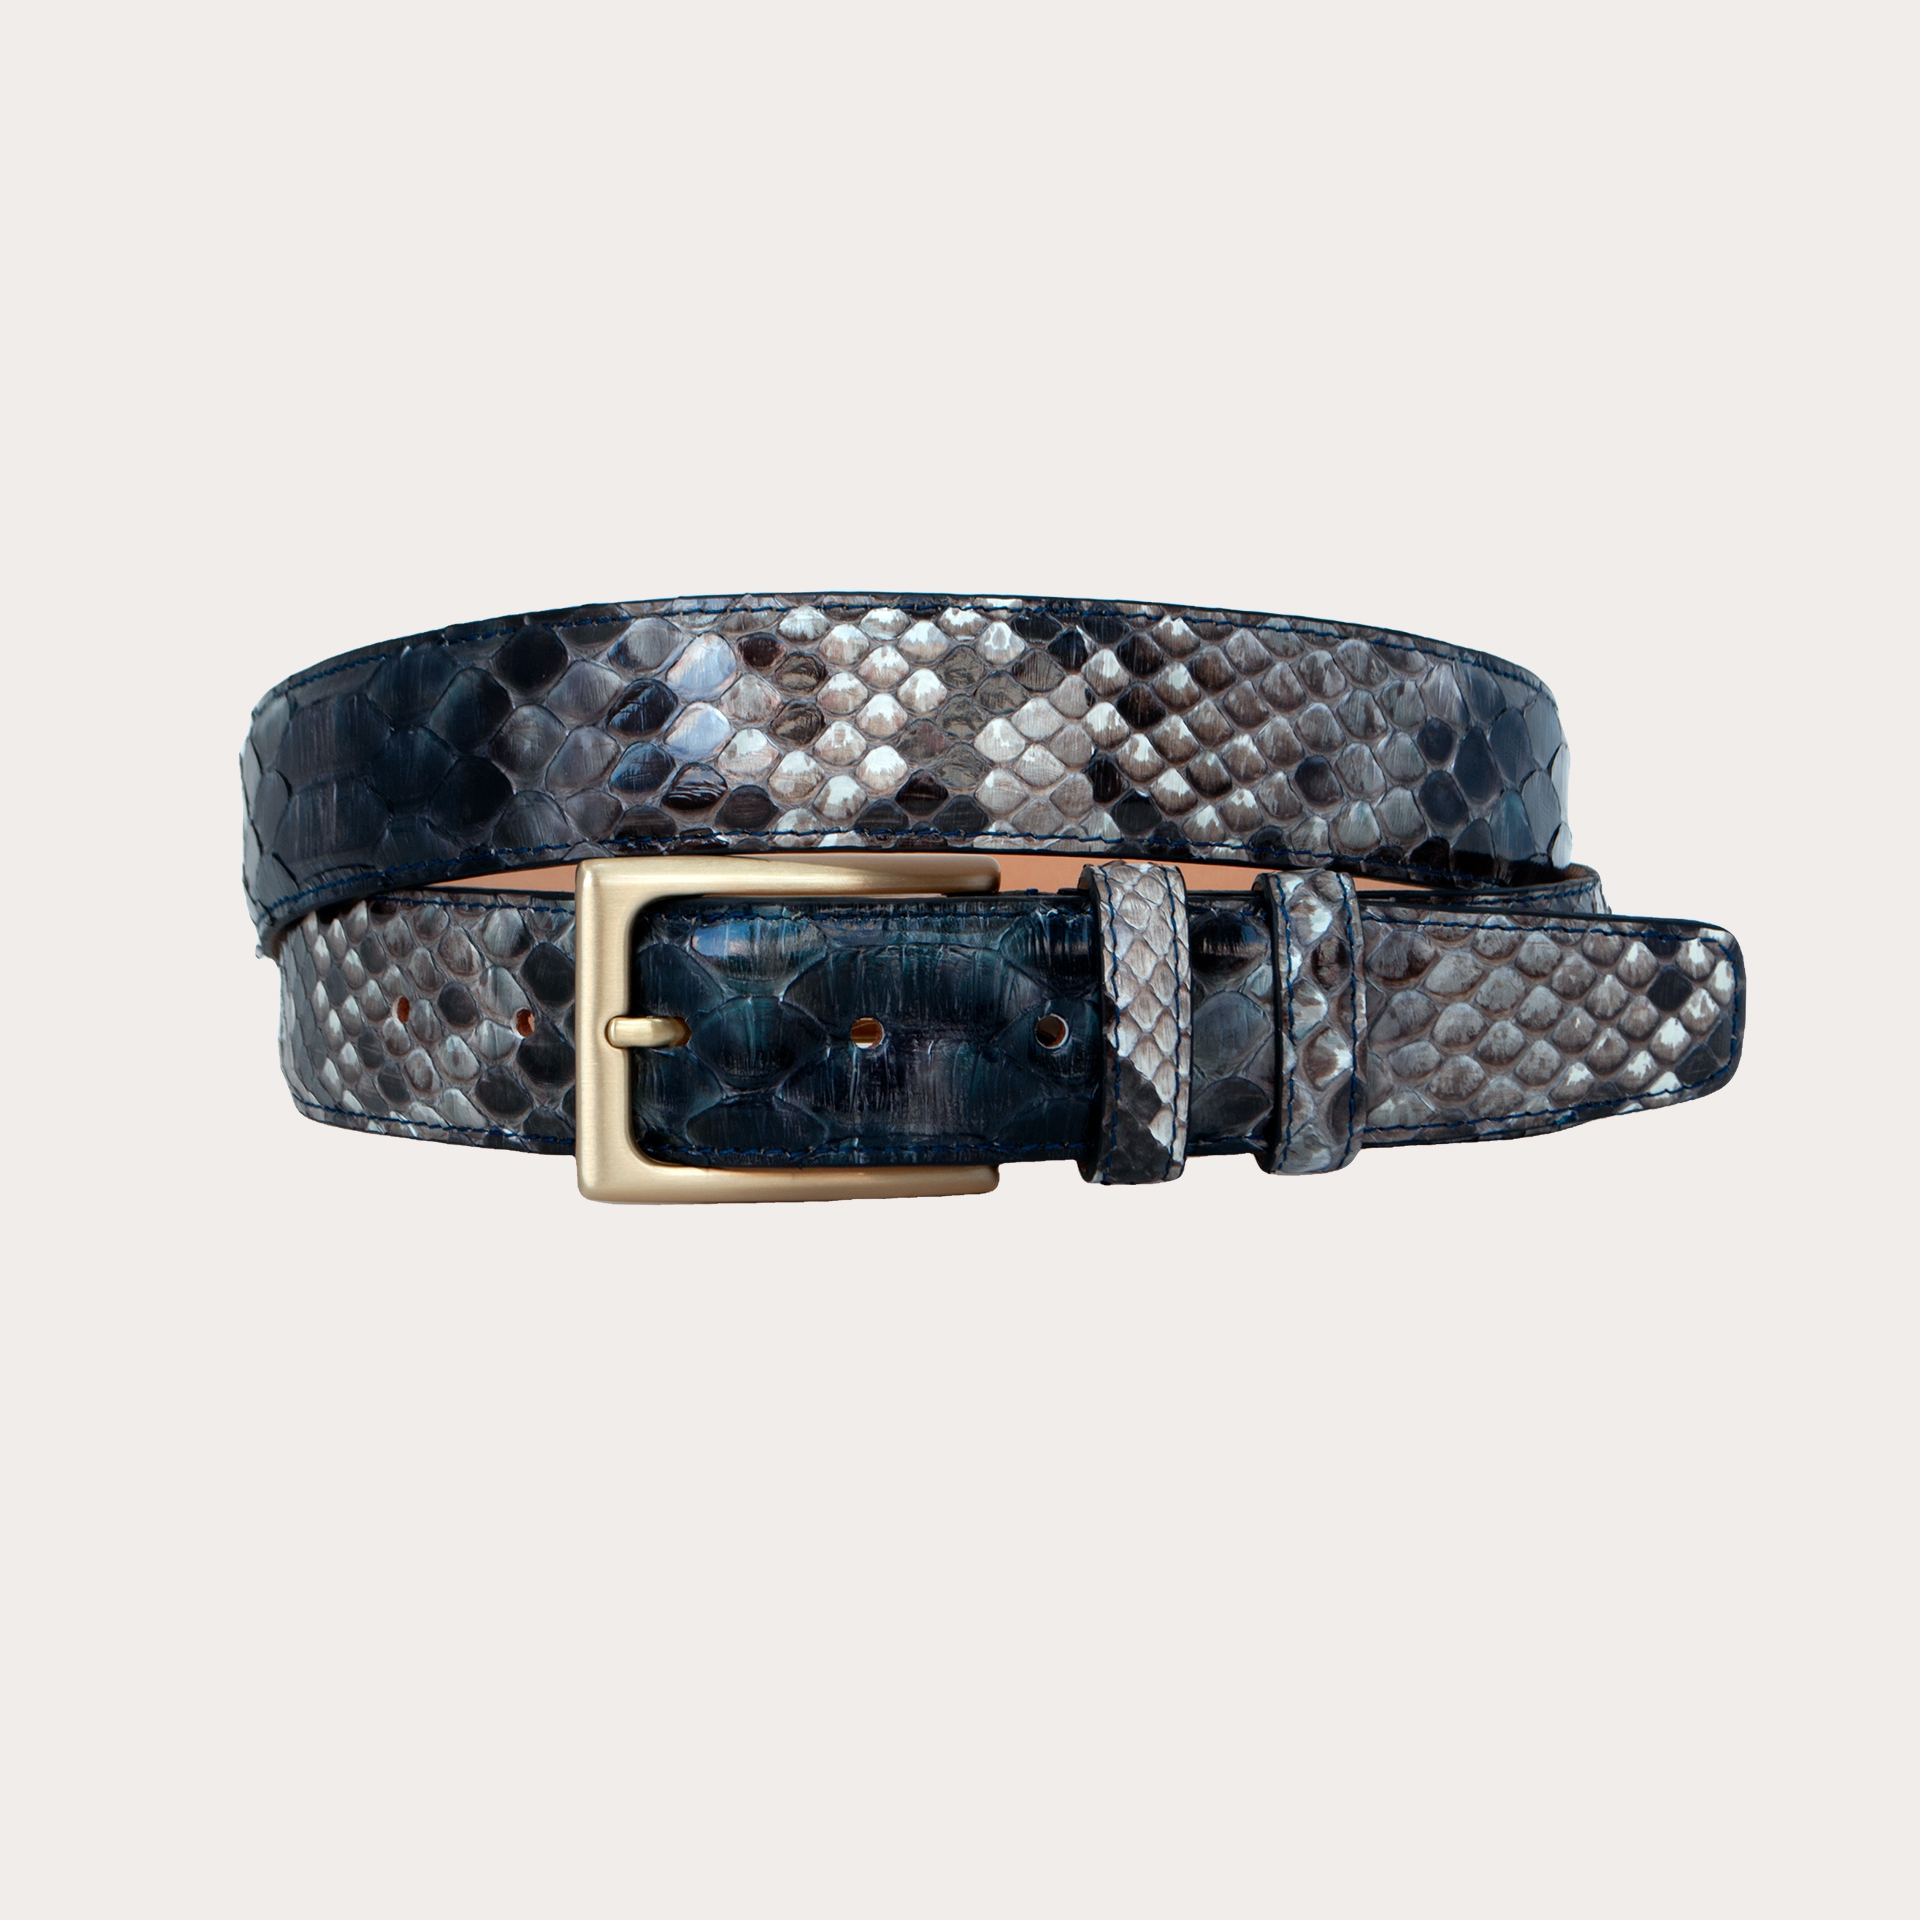 BRUCLE Hand-buffered shiny python belt with nickel free gold buckle, shades of blue and rock